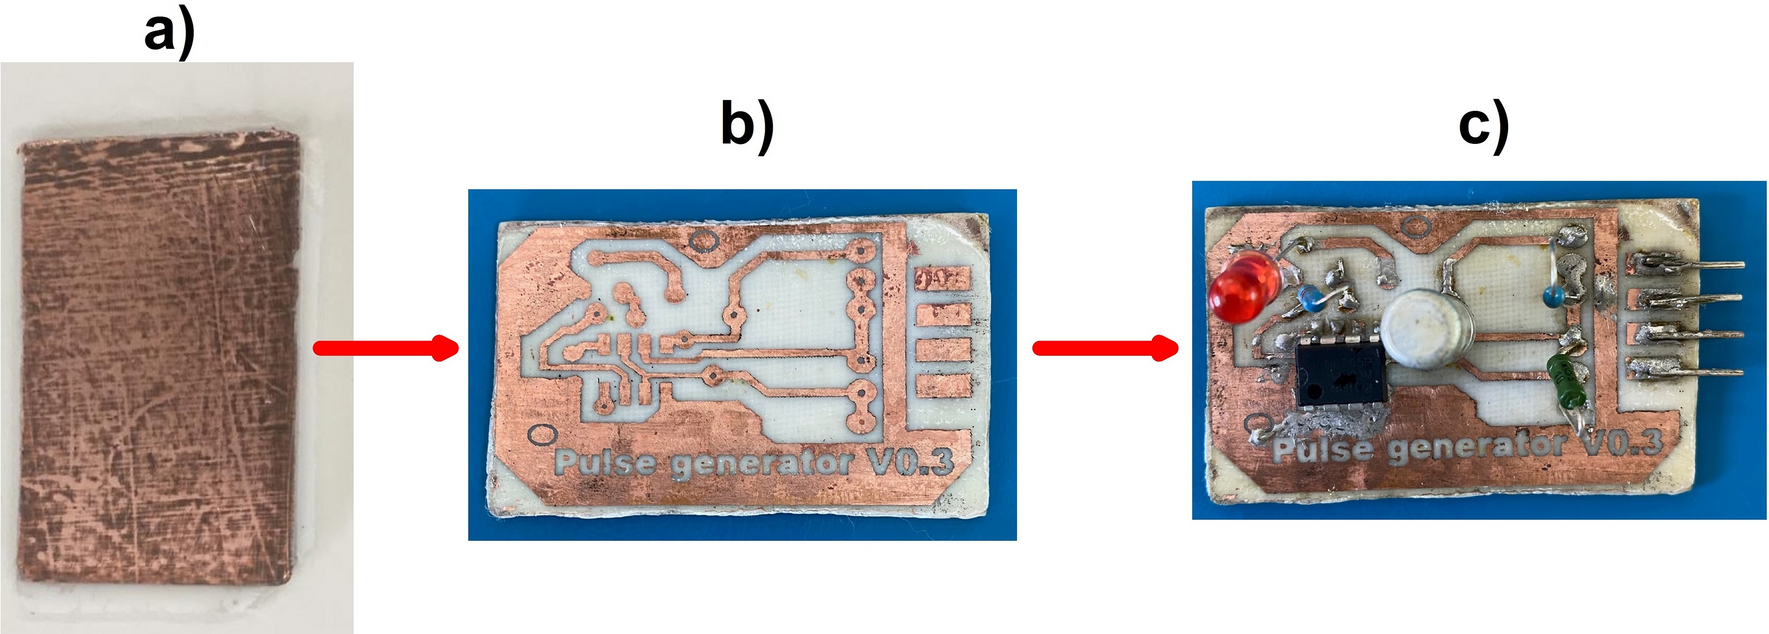 A new approach to designing easily recyclable printed circuit